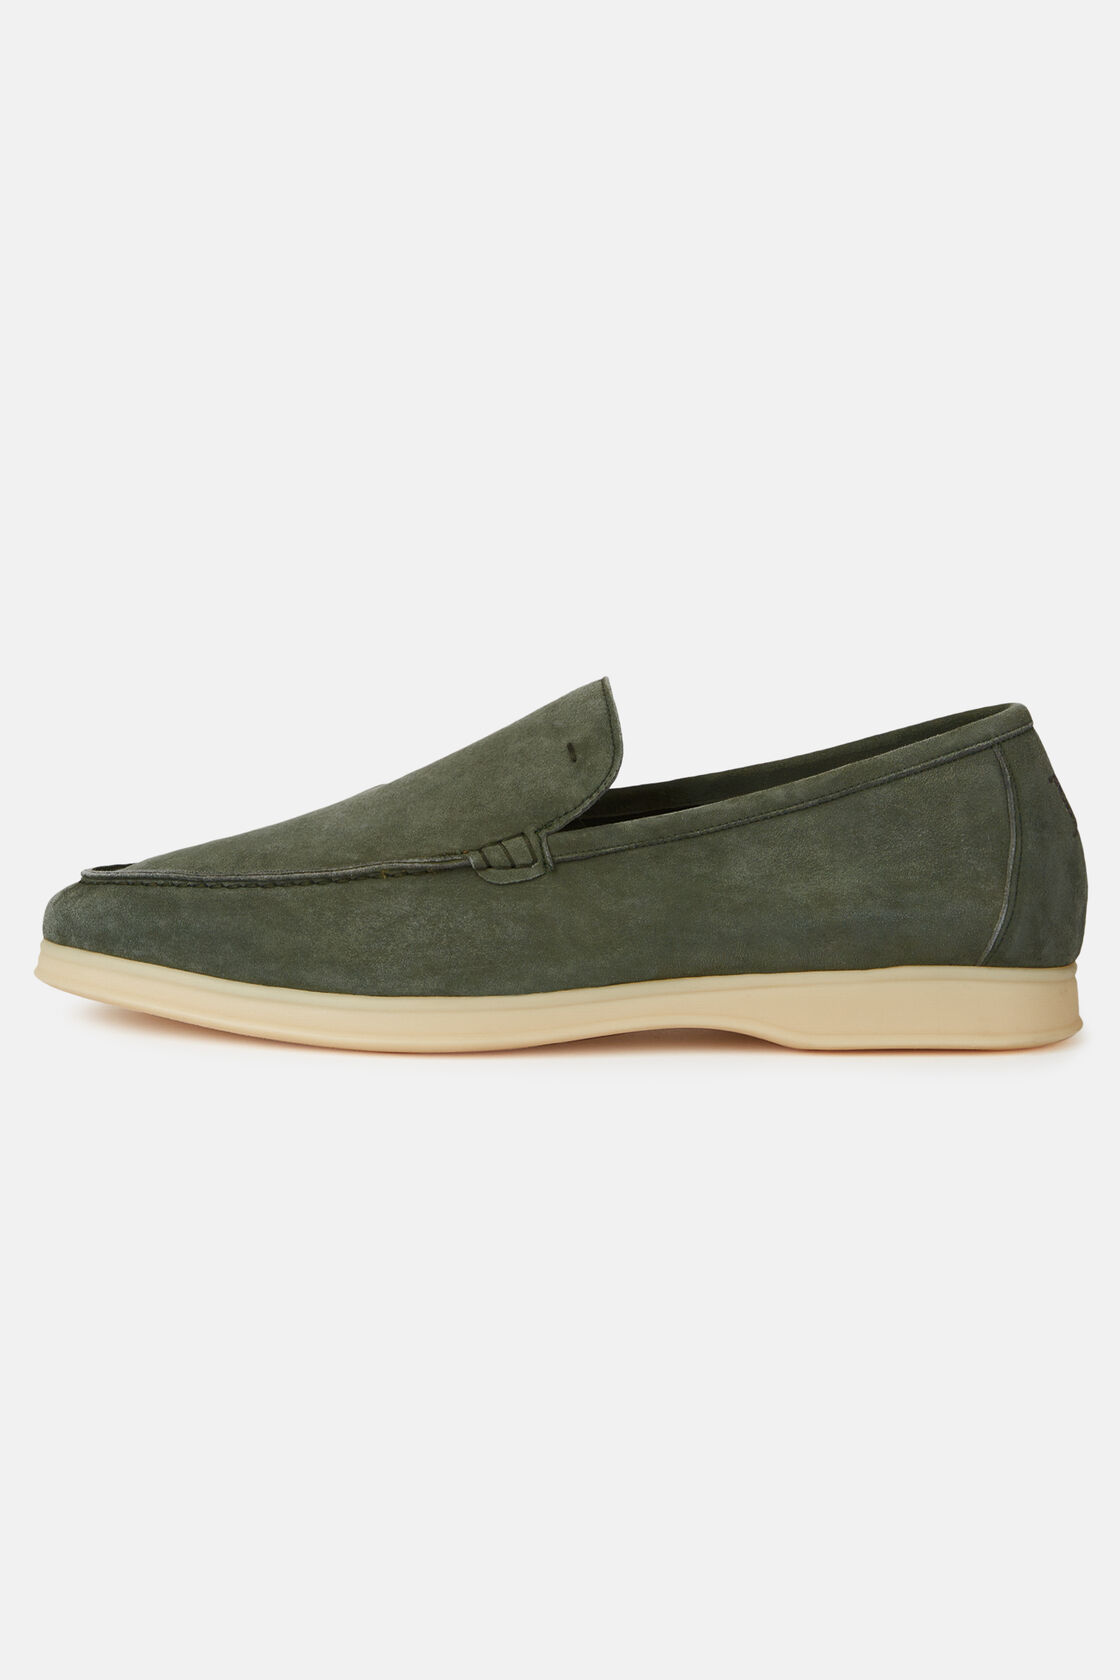 Aria Suede Loafers, Green, hi-res